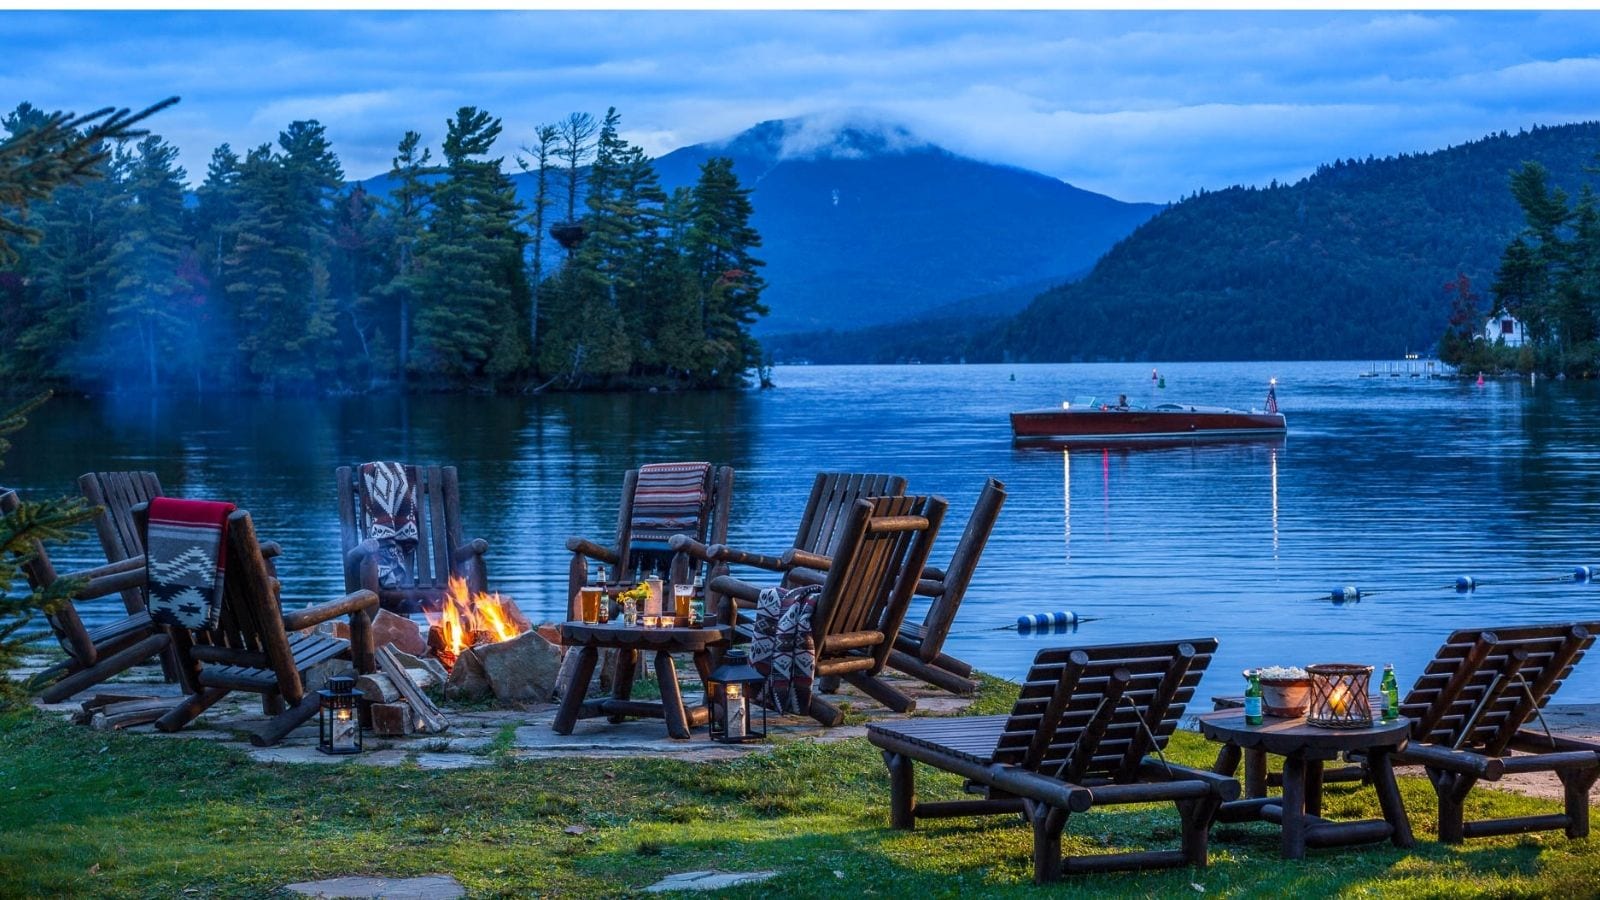 Whiteface Lodge is tucked into the woodlands above Lake Placid (Photo: Whiteface Lodge)